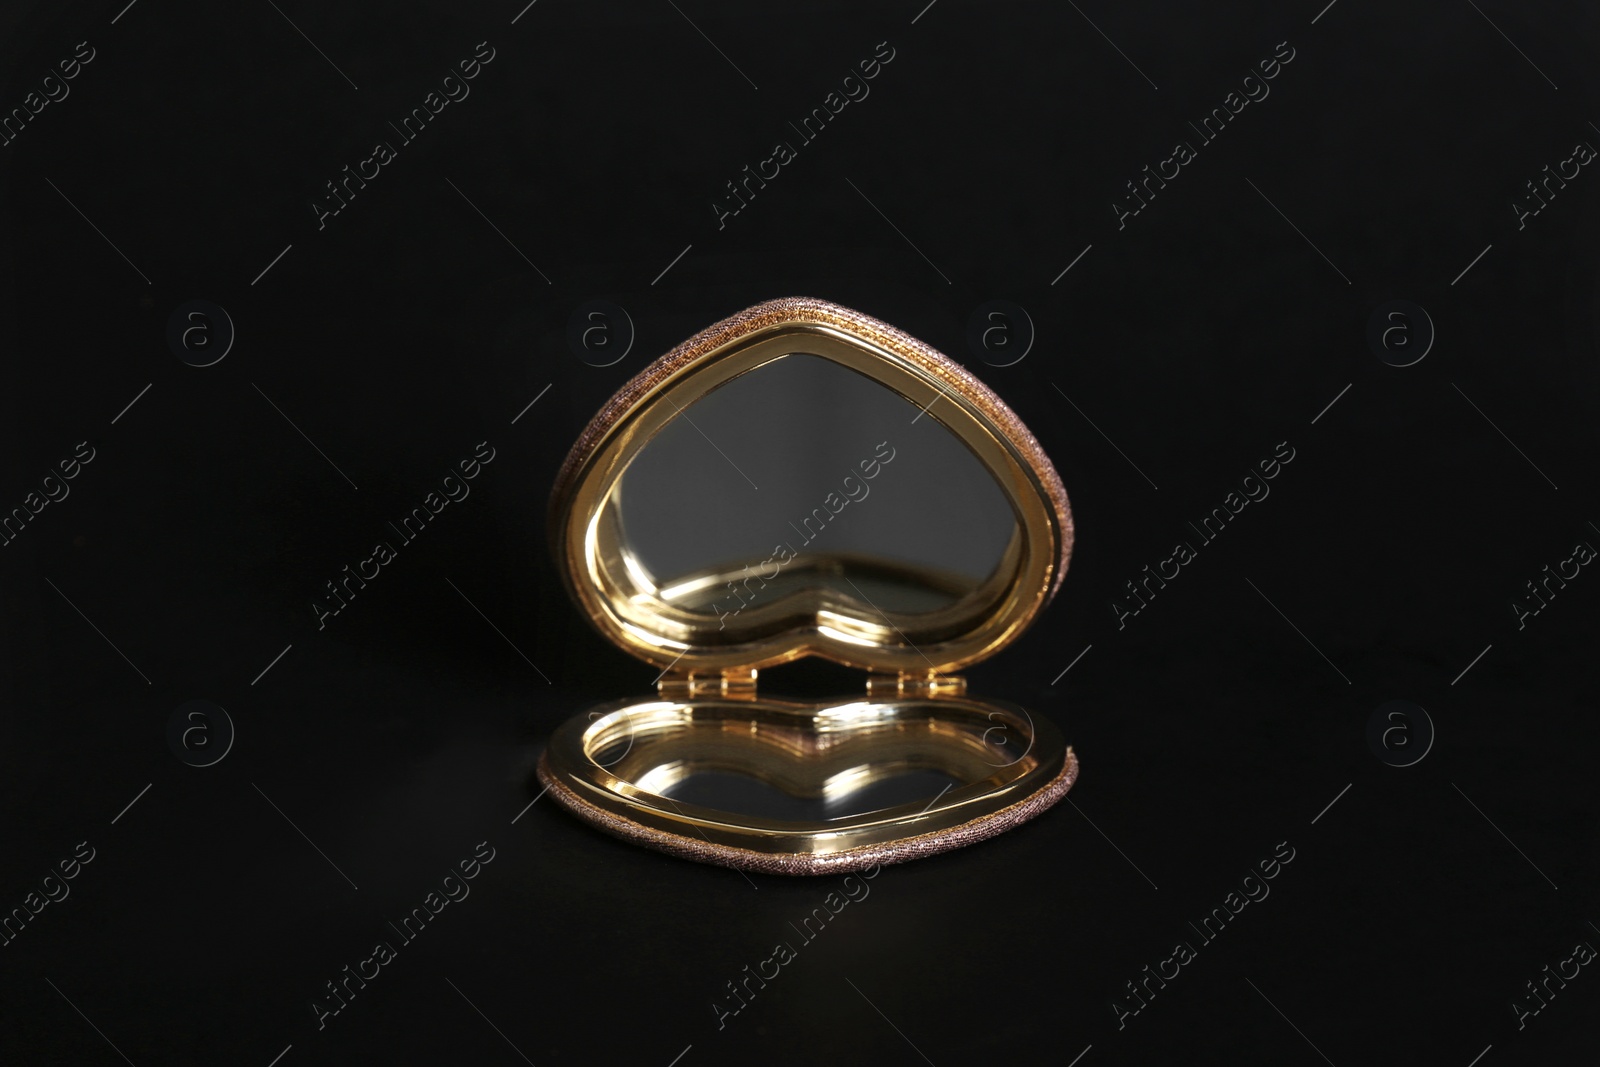 Photo of Heart shaped gold pocket mirror on black background